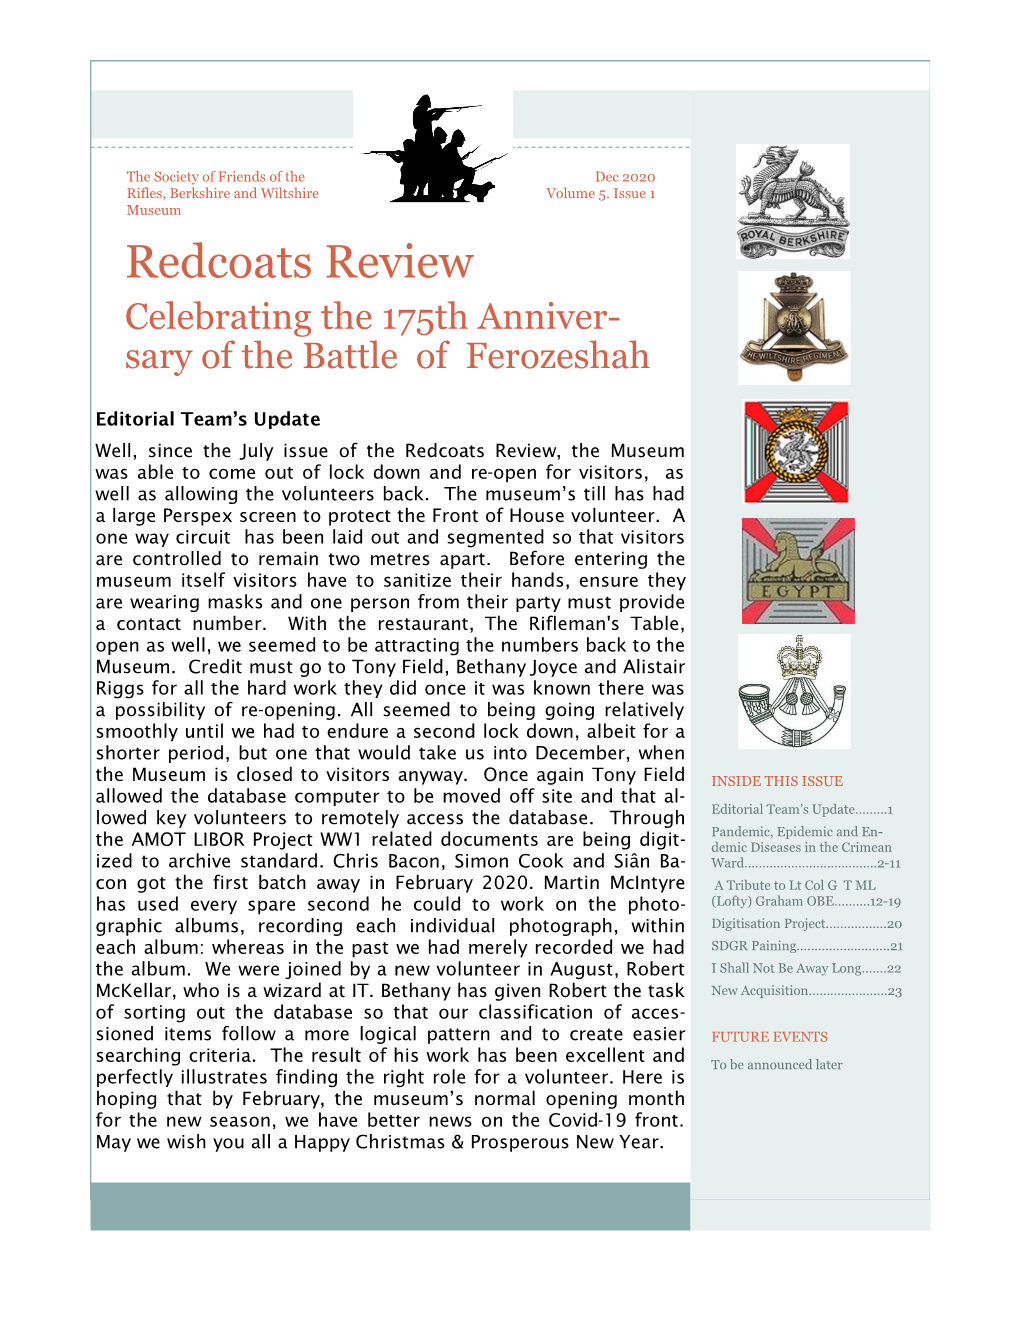 Redcoats Review Celebrating the 175Th Anniver- Sary of the Battle of Ferozeshah